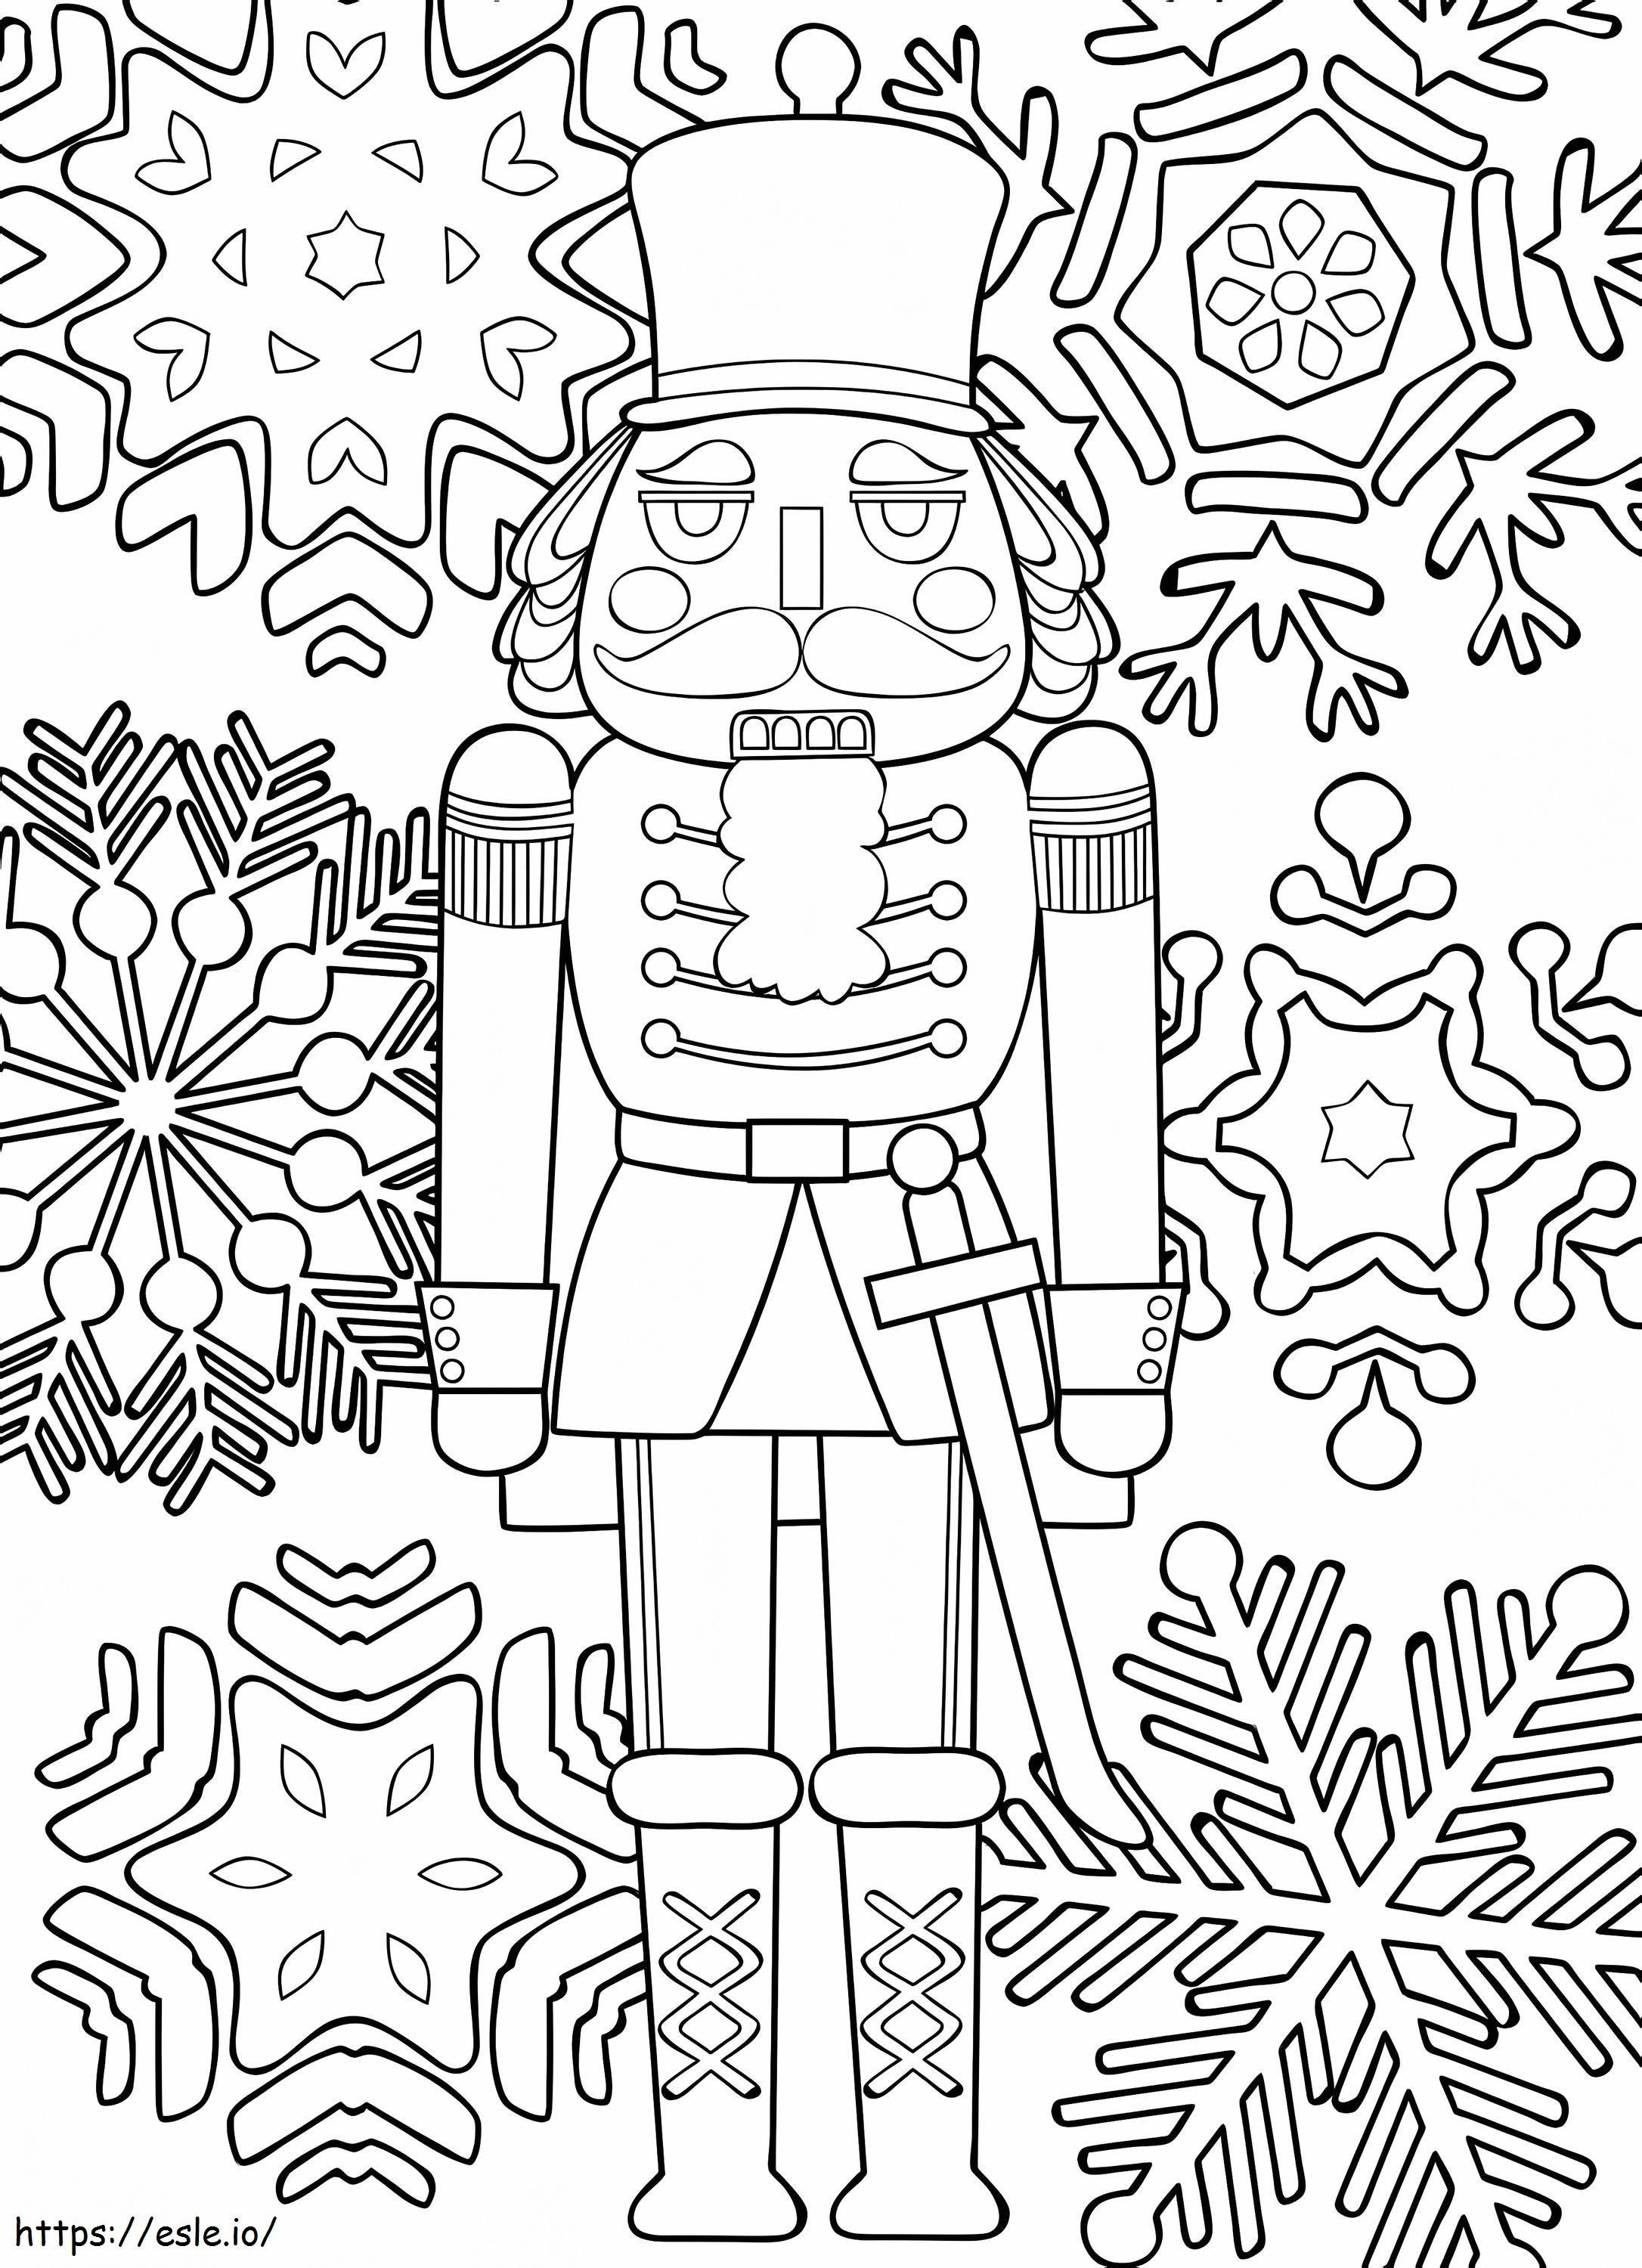 Nutcracker With Snowflakes coloring page